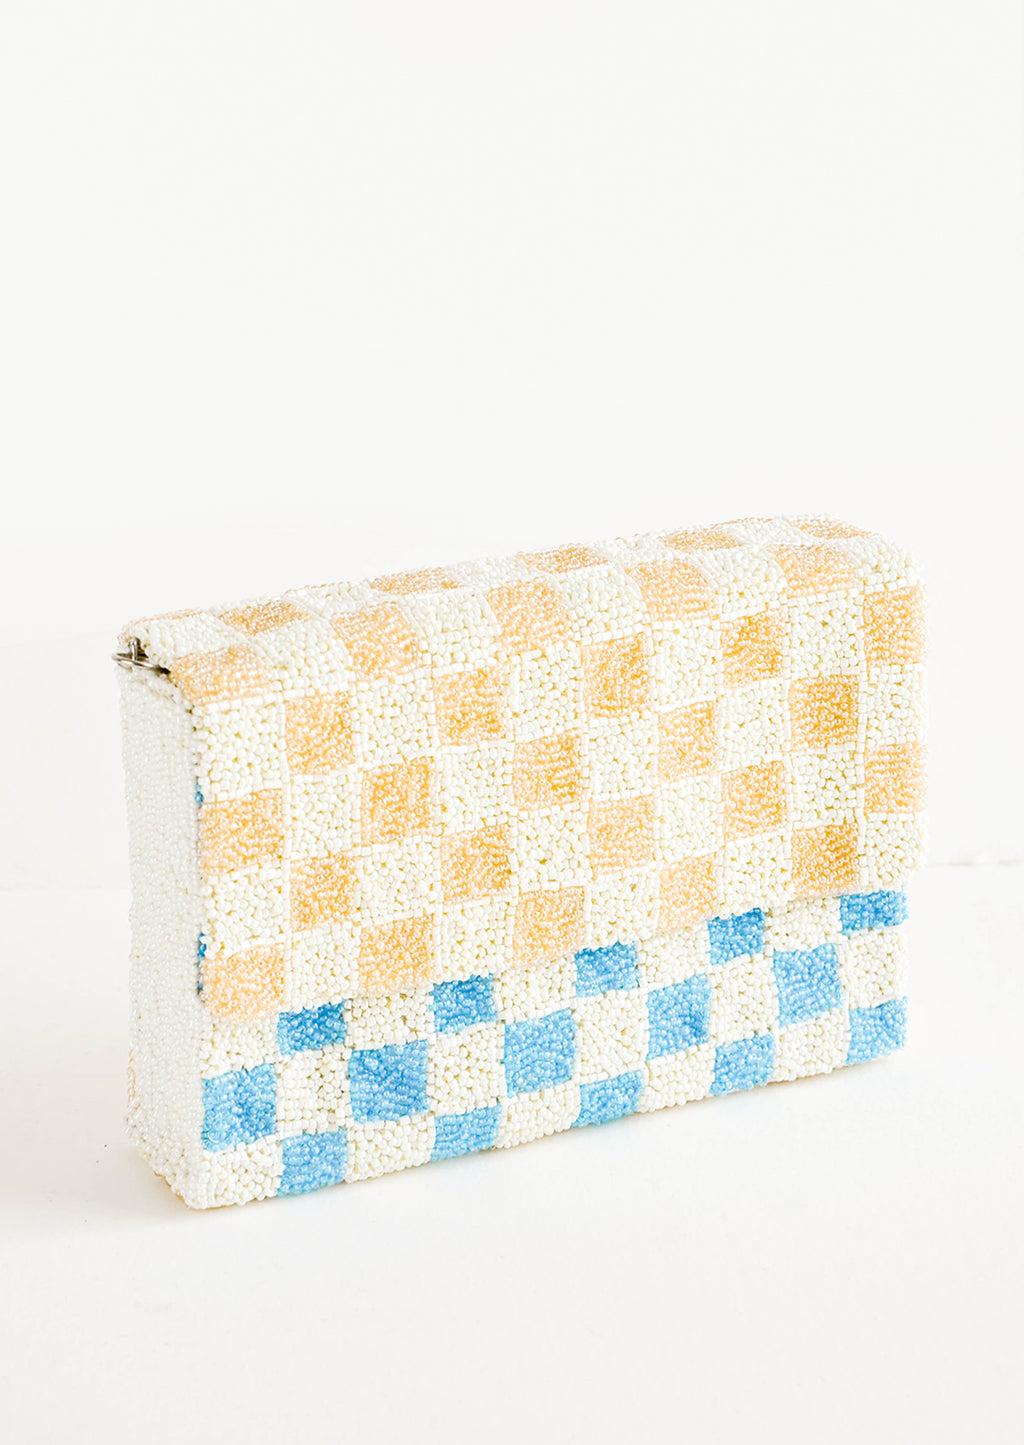 Coffee / Turquoise: Checkerboard Beaded Clutch in Coffee / Turquoise - LEIF